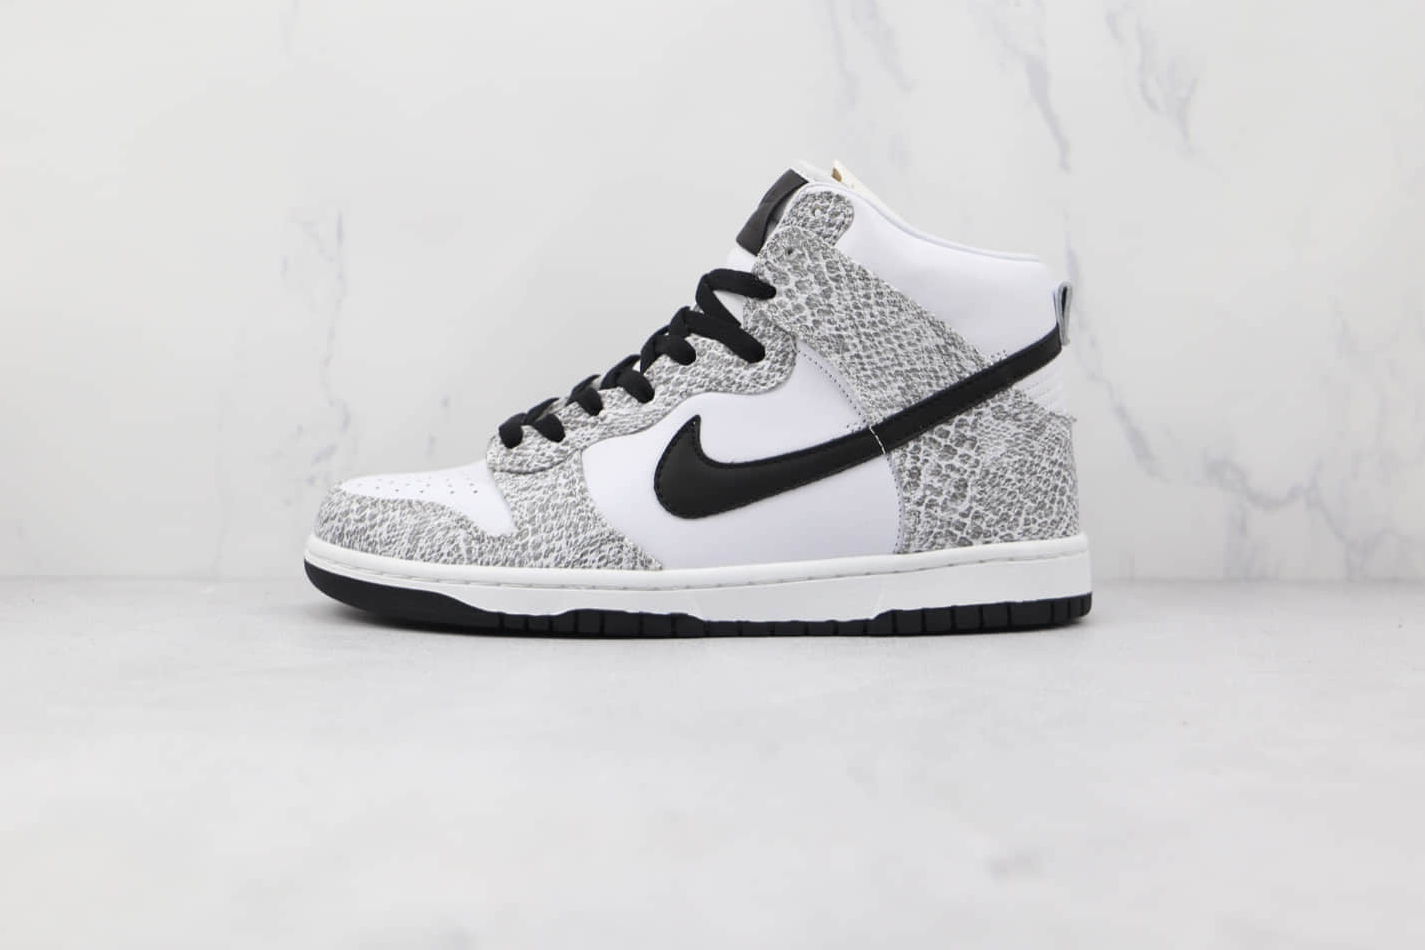 Nike Dunk Prm Hi Sp 'Cocoa Snake' 624512-010 - Stylish Black and White Sneakers